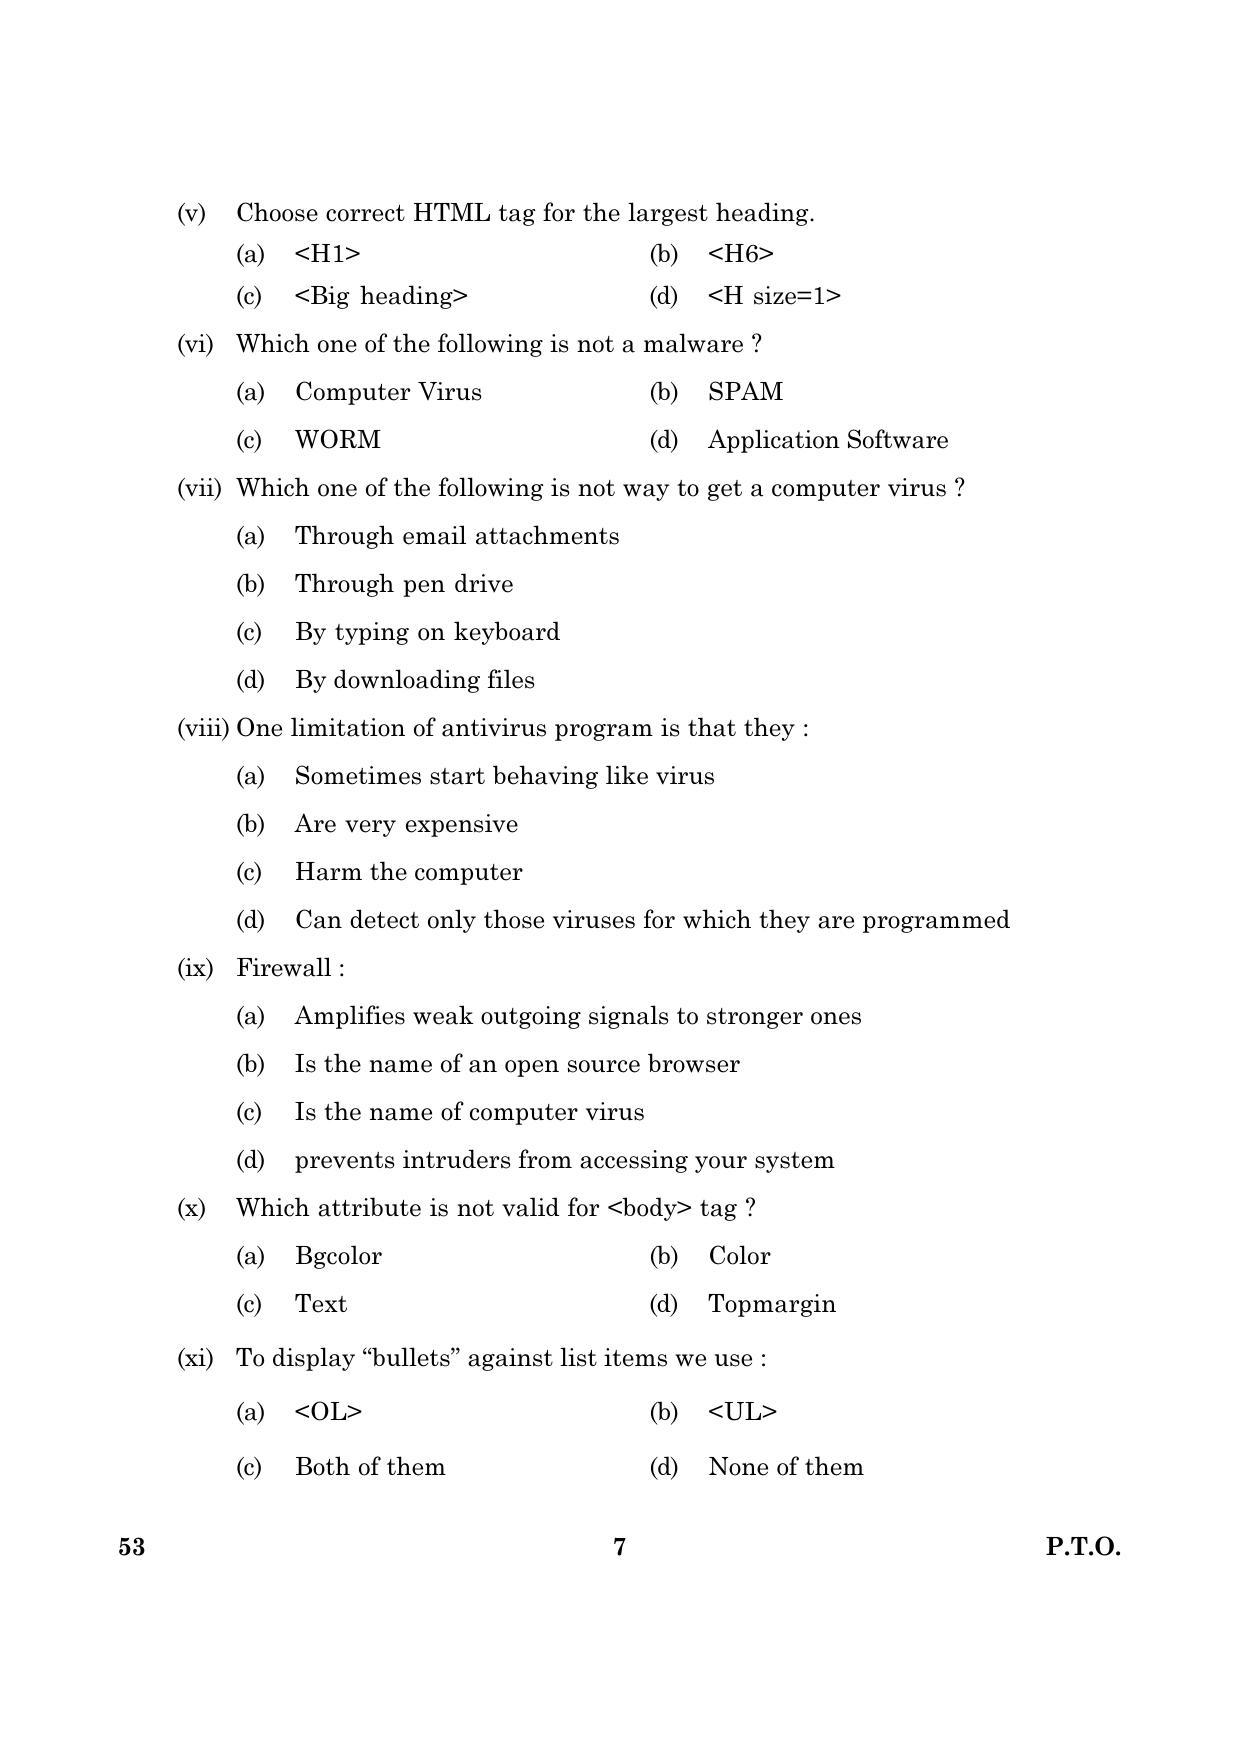 CBSE Class 10 053 Foundation Of Information Technology 2016 Question Paper - Page 7